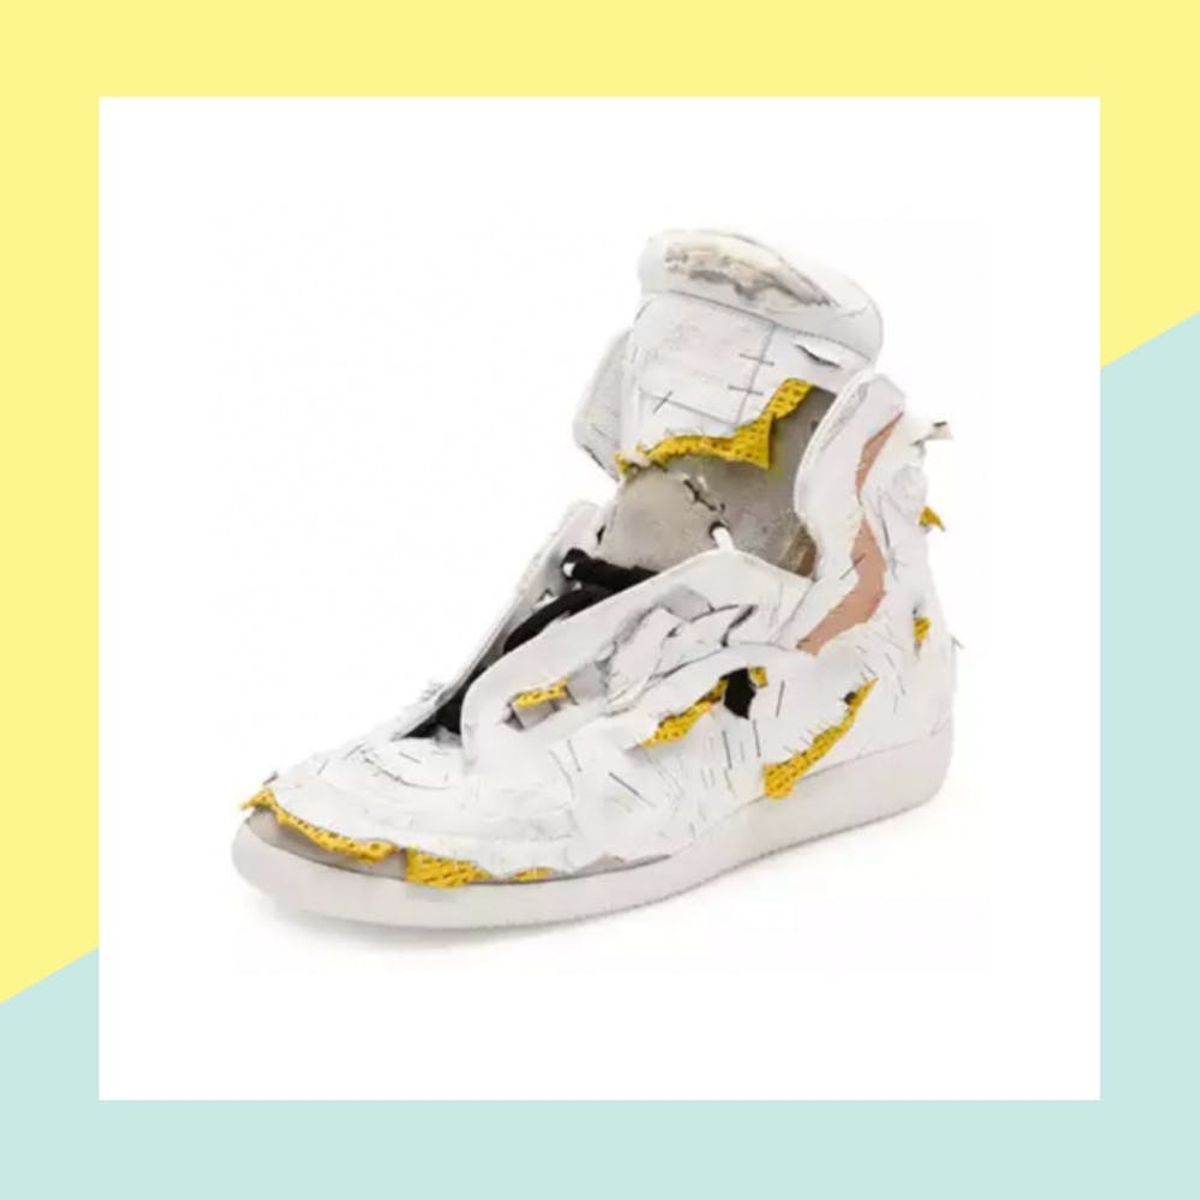 These $1425 Designer Sneakers Look Like They’ve Been Through a Shredder